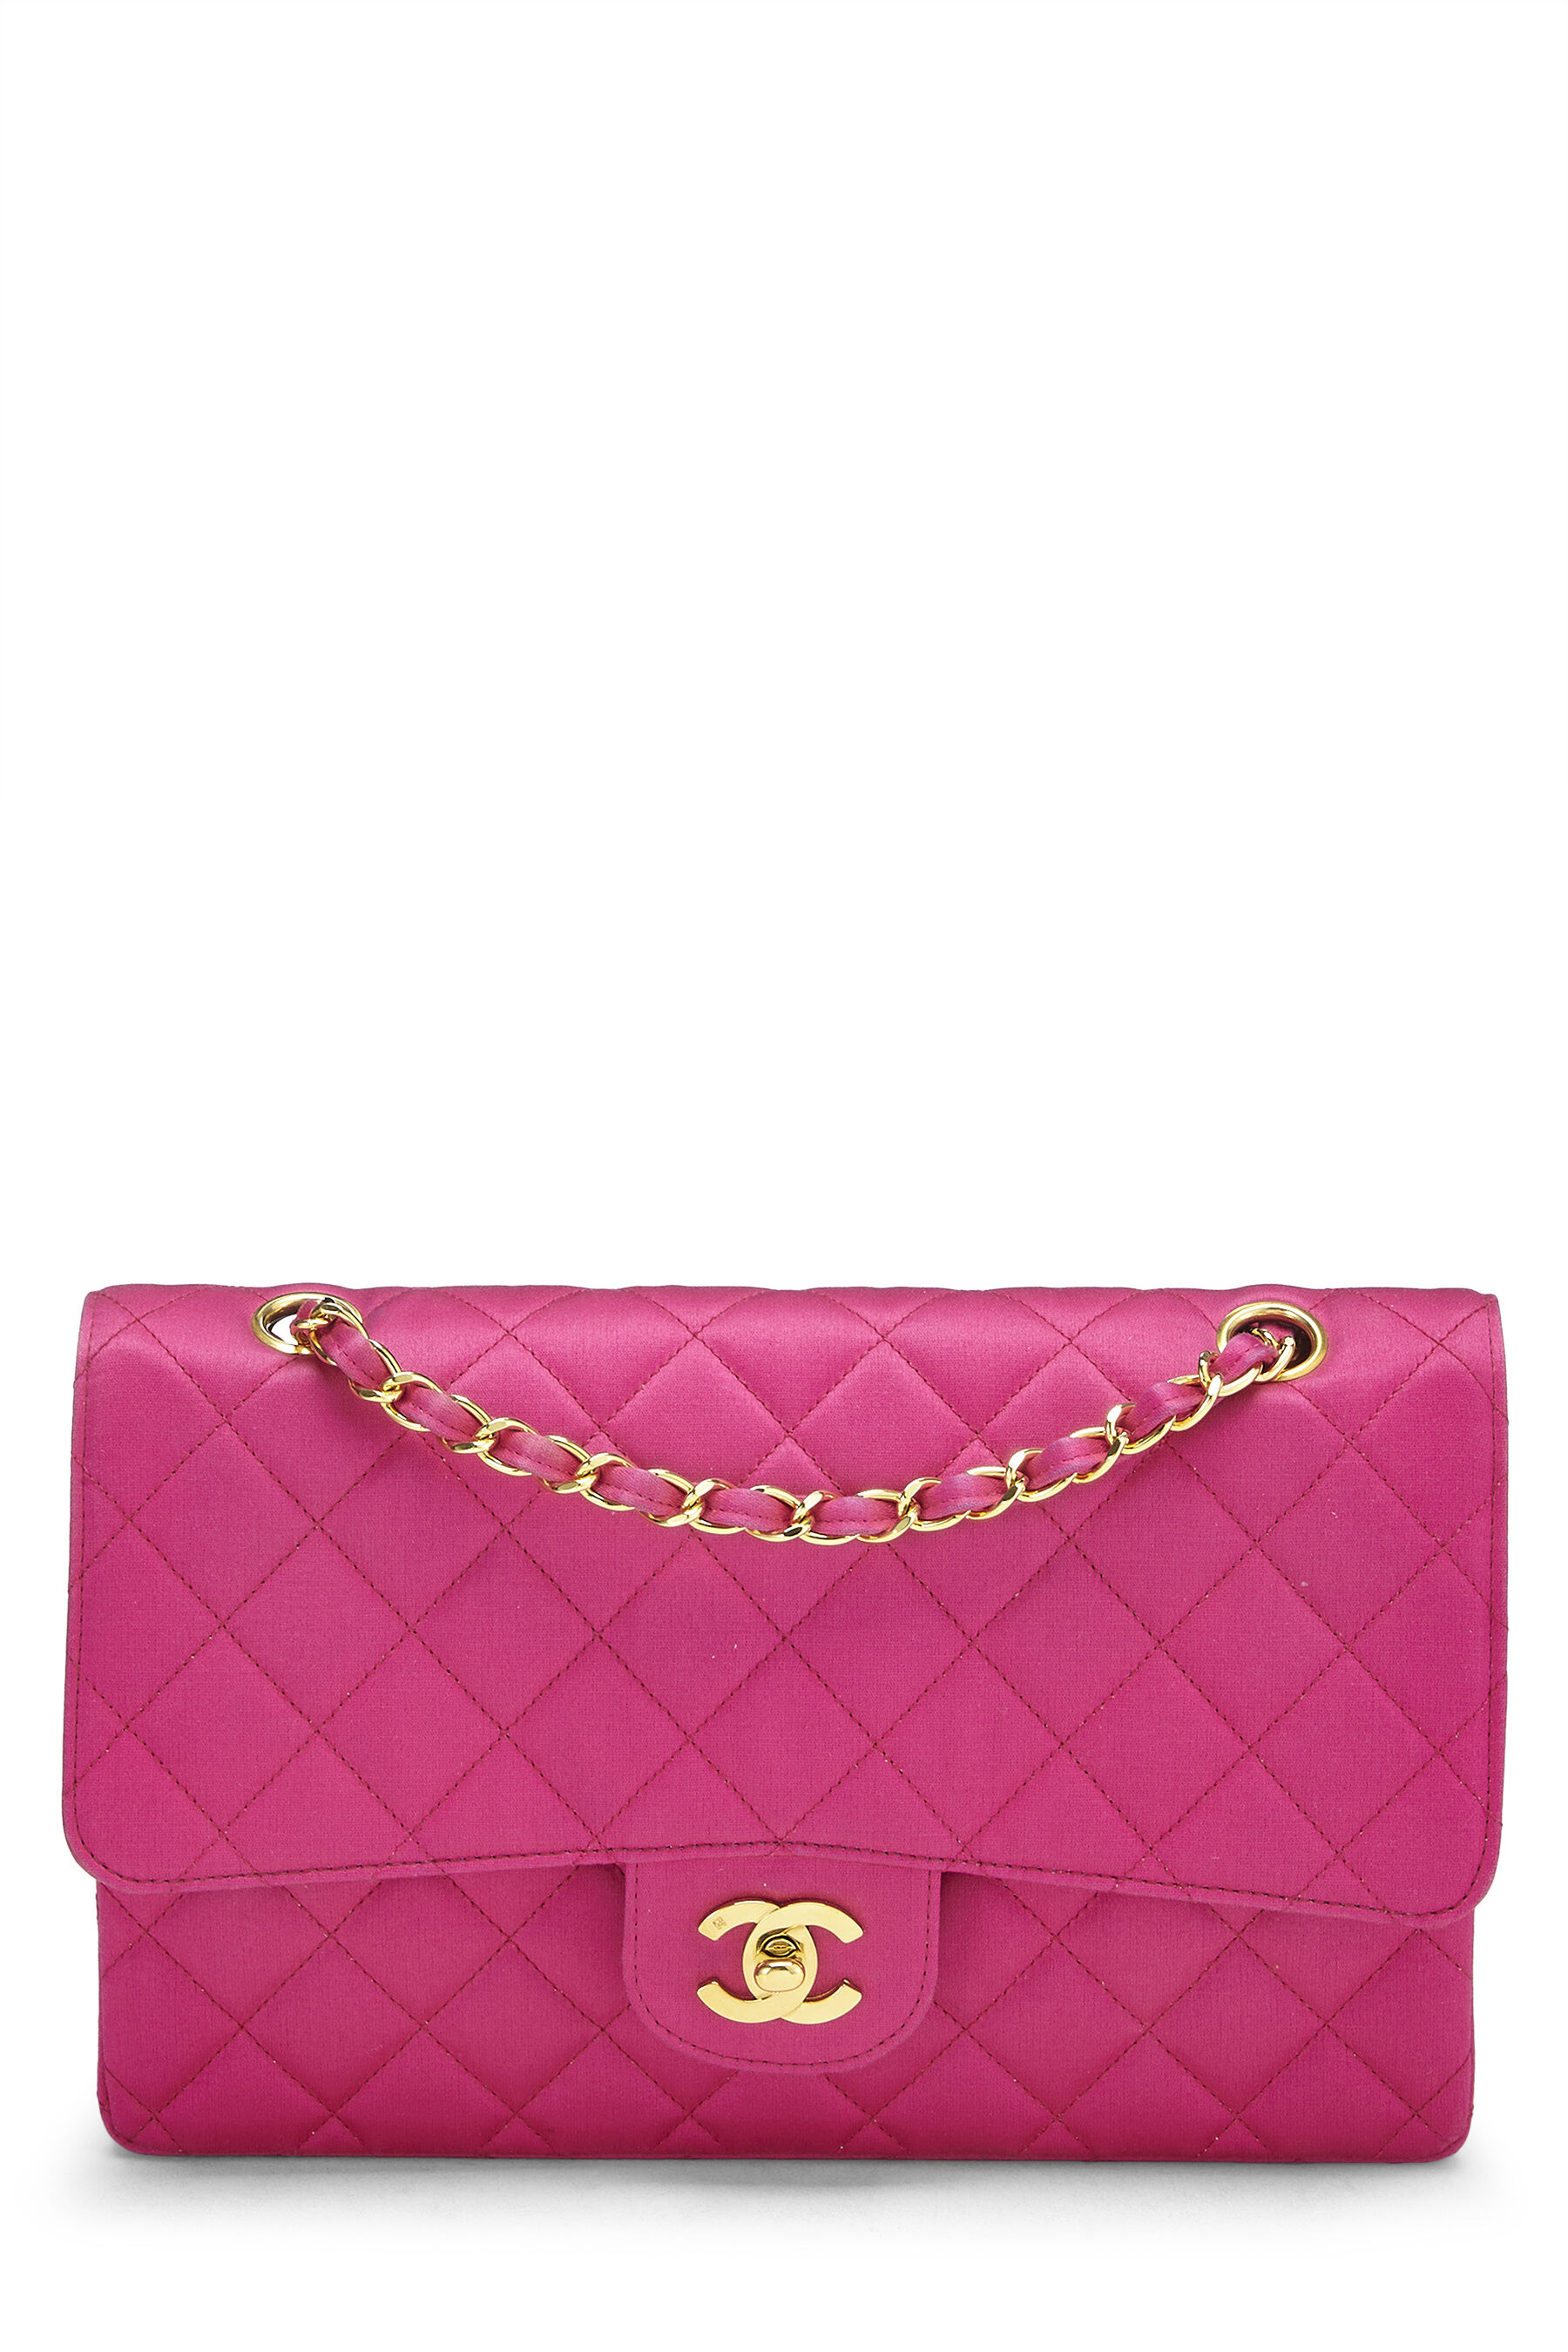 Chanel - Pink Quilted Satin Classic Double Flap Medium